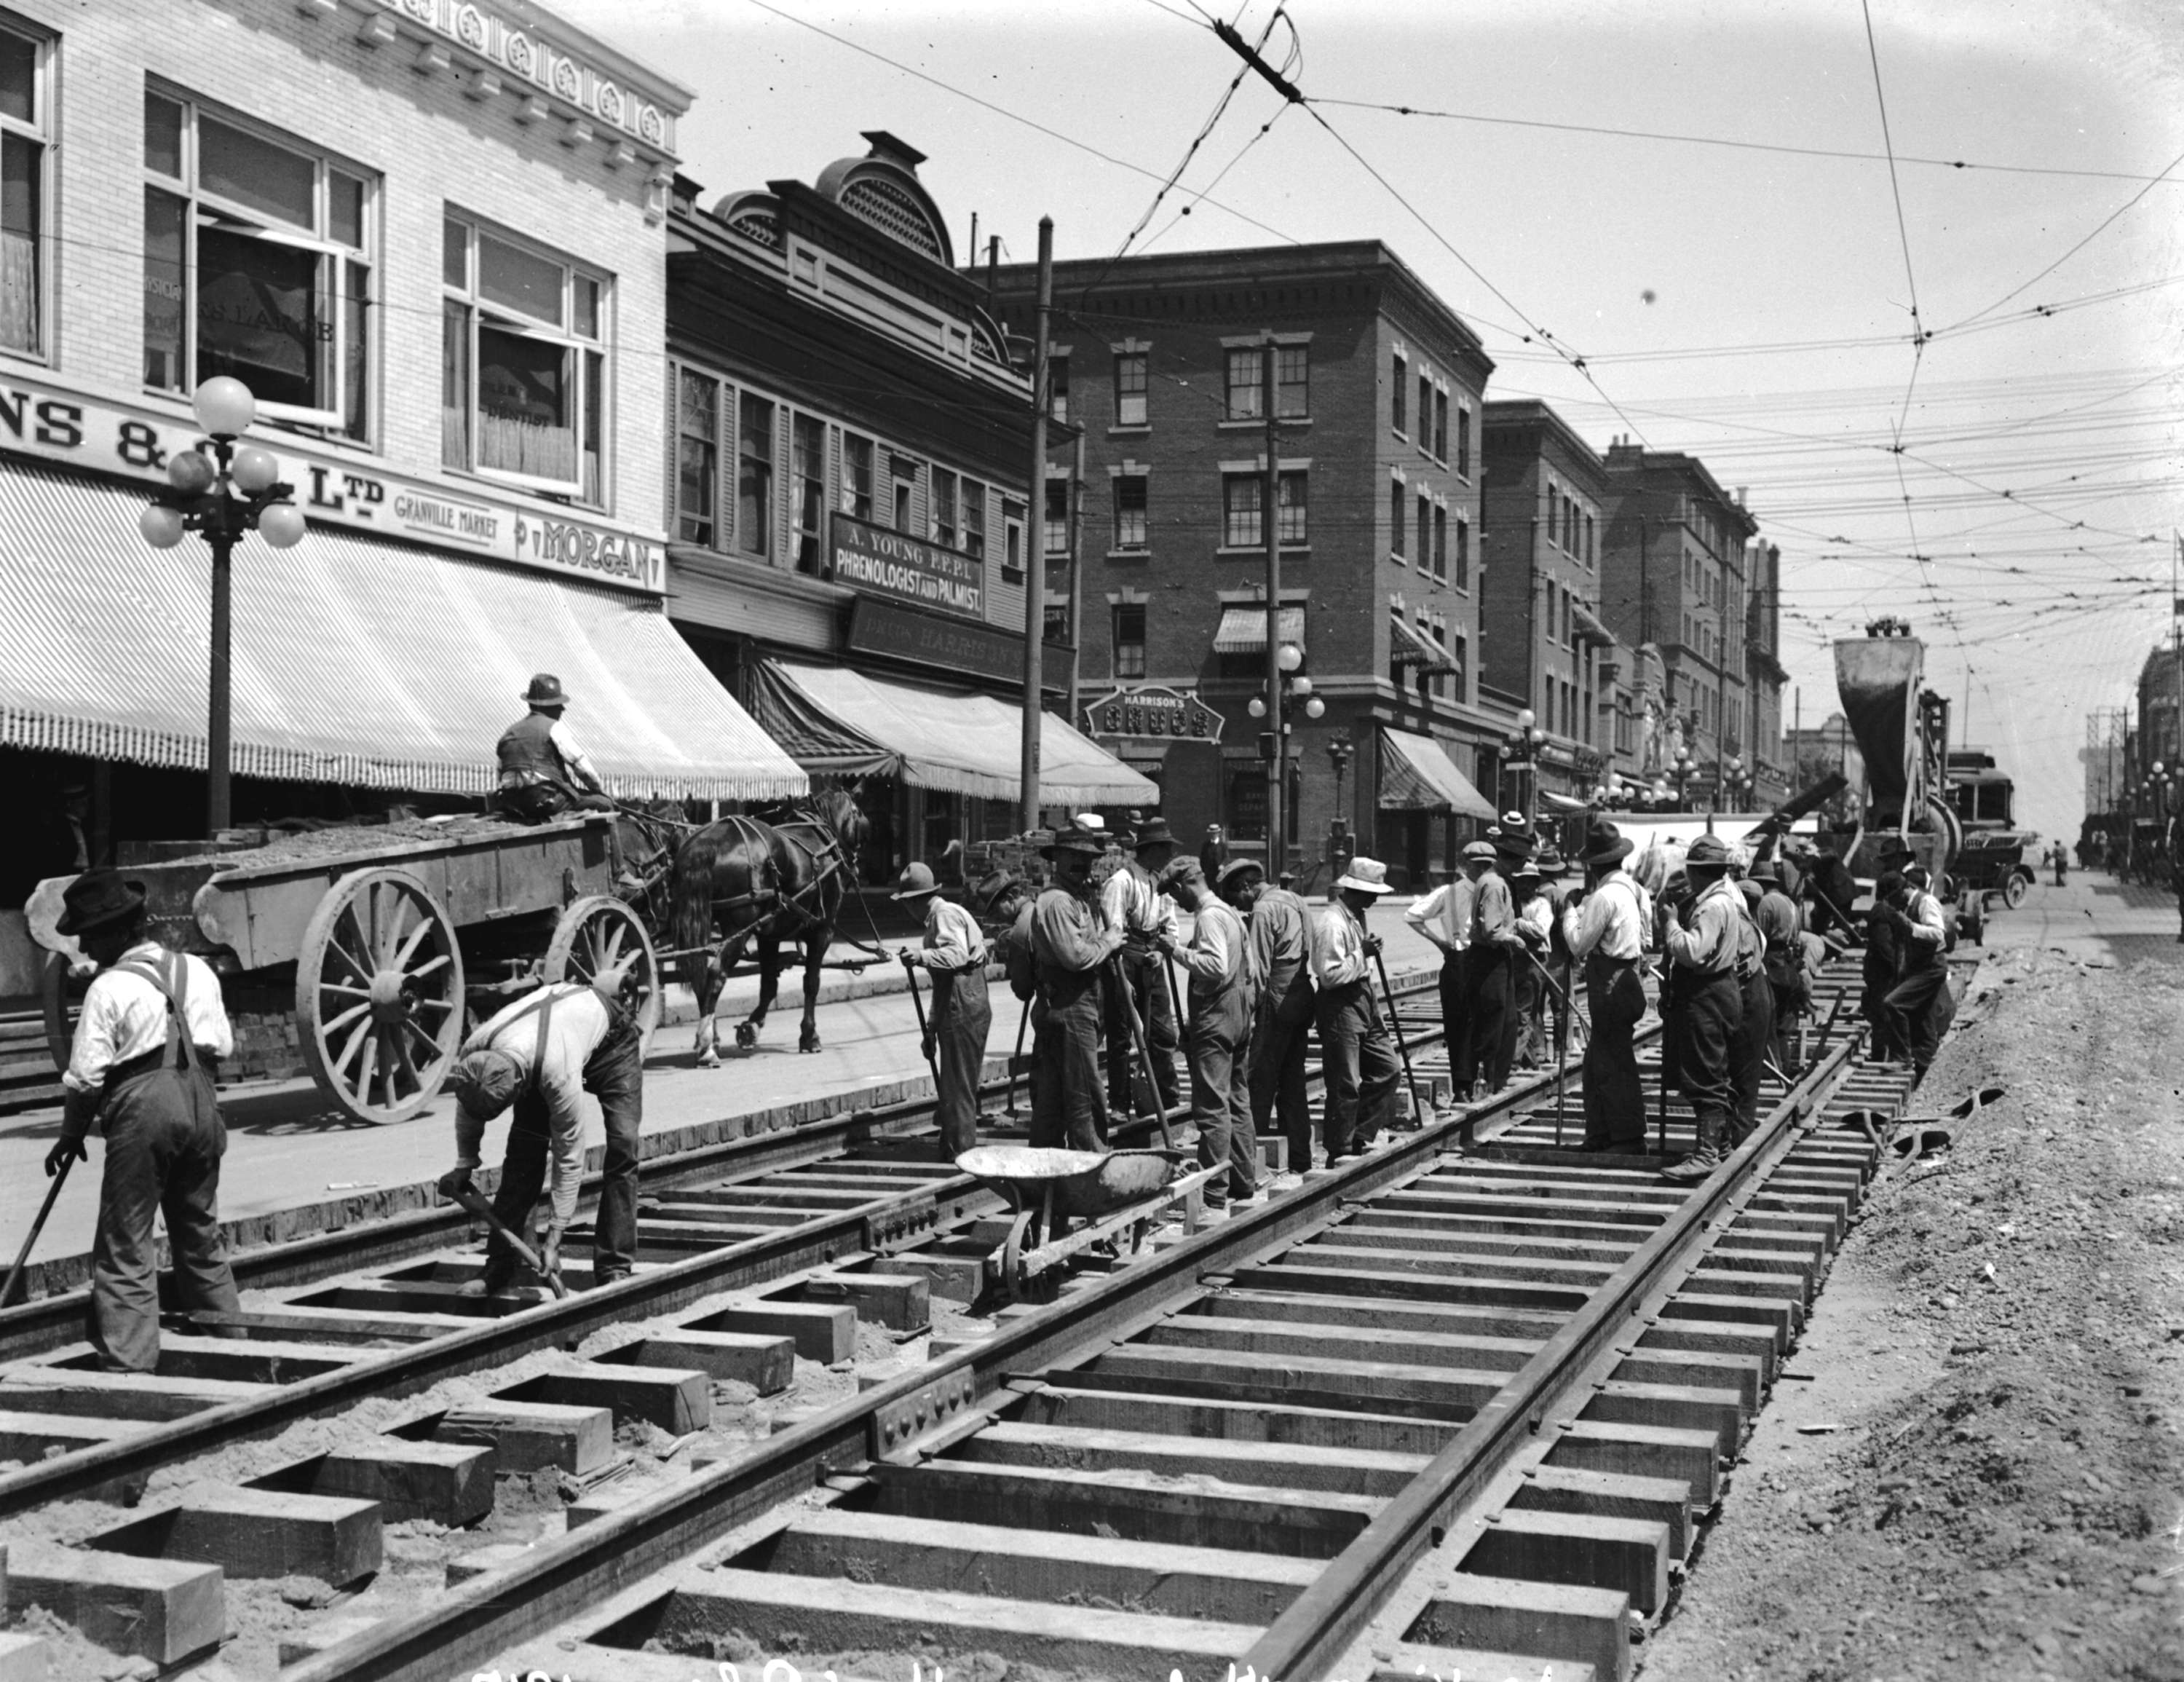 Laying the line for streetcars at Granville and Robson, Vancouver